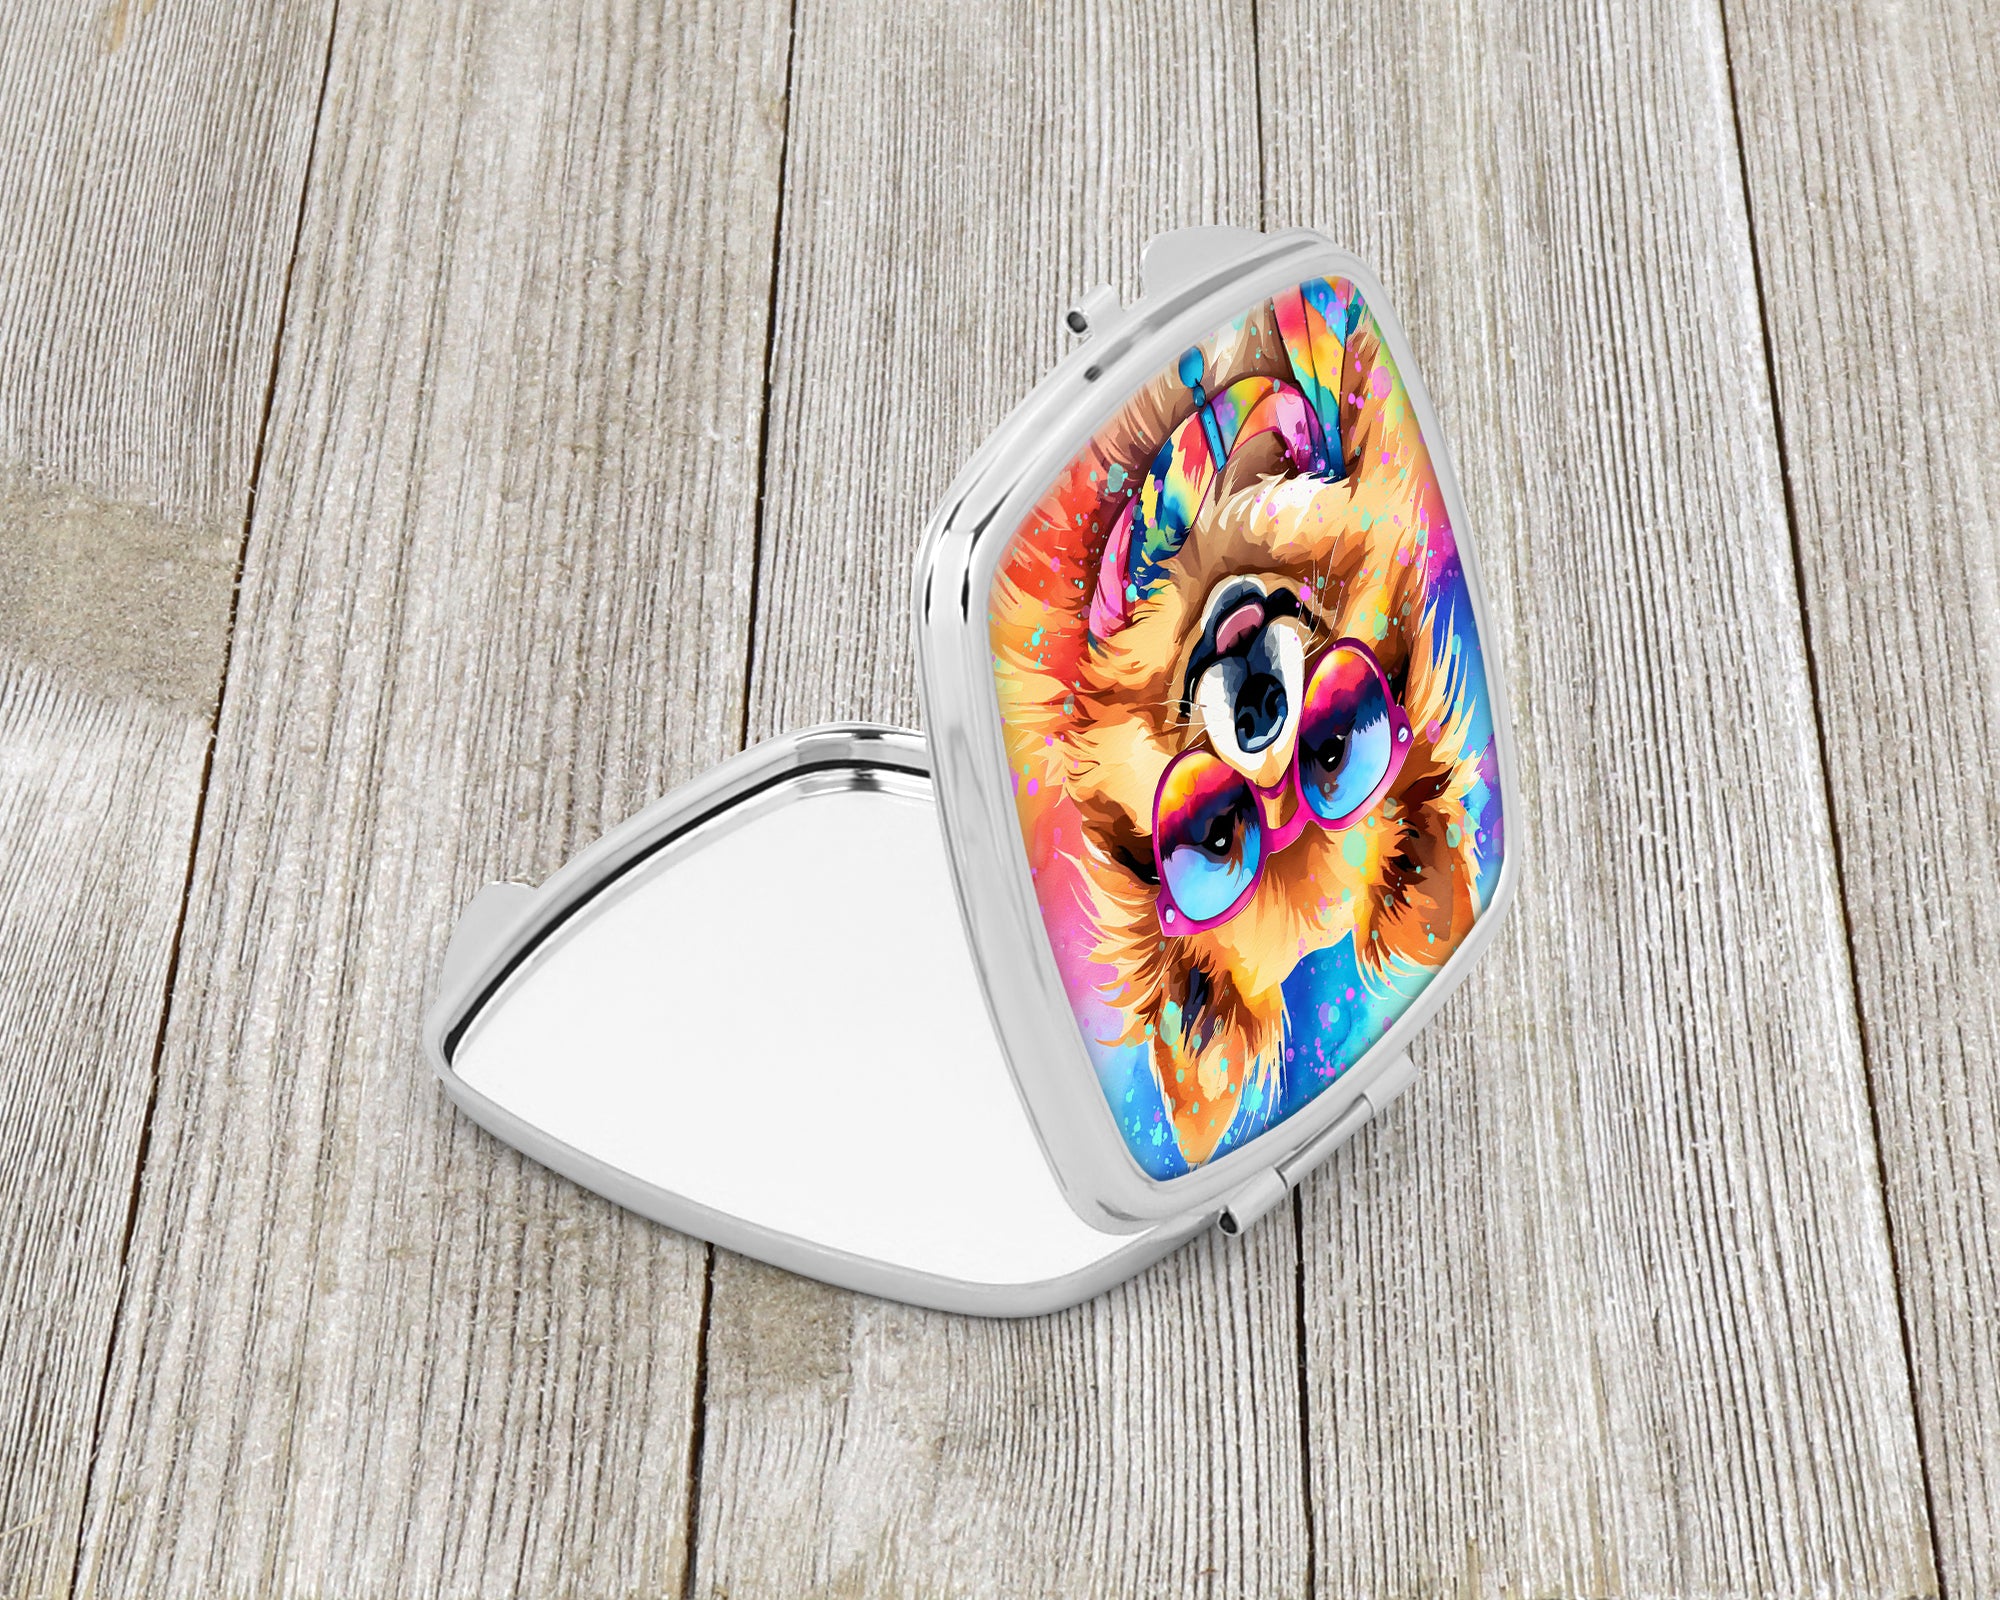 Buy this Pomeranian Hippie Dawg Compact Mirror